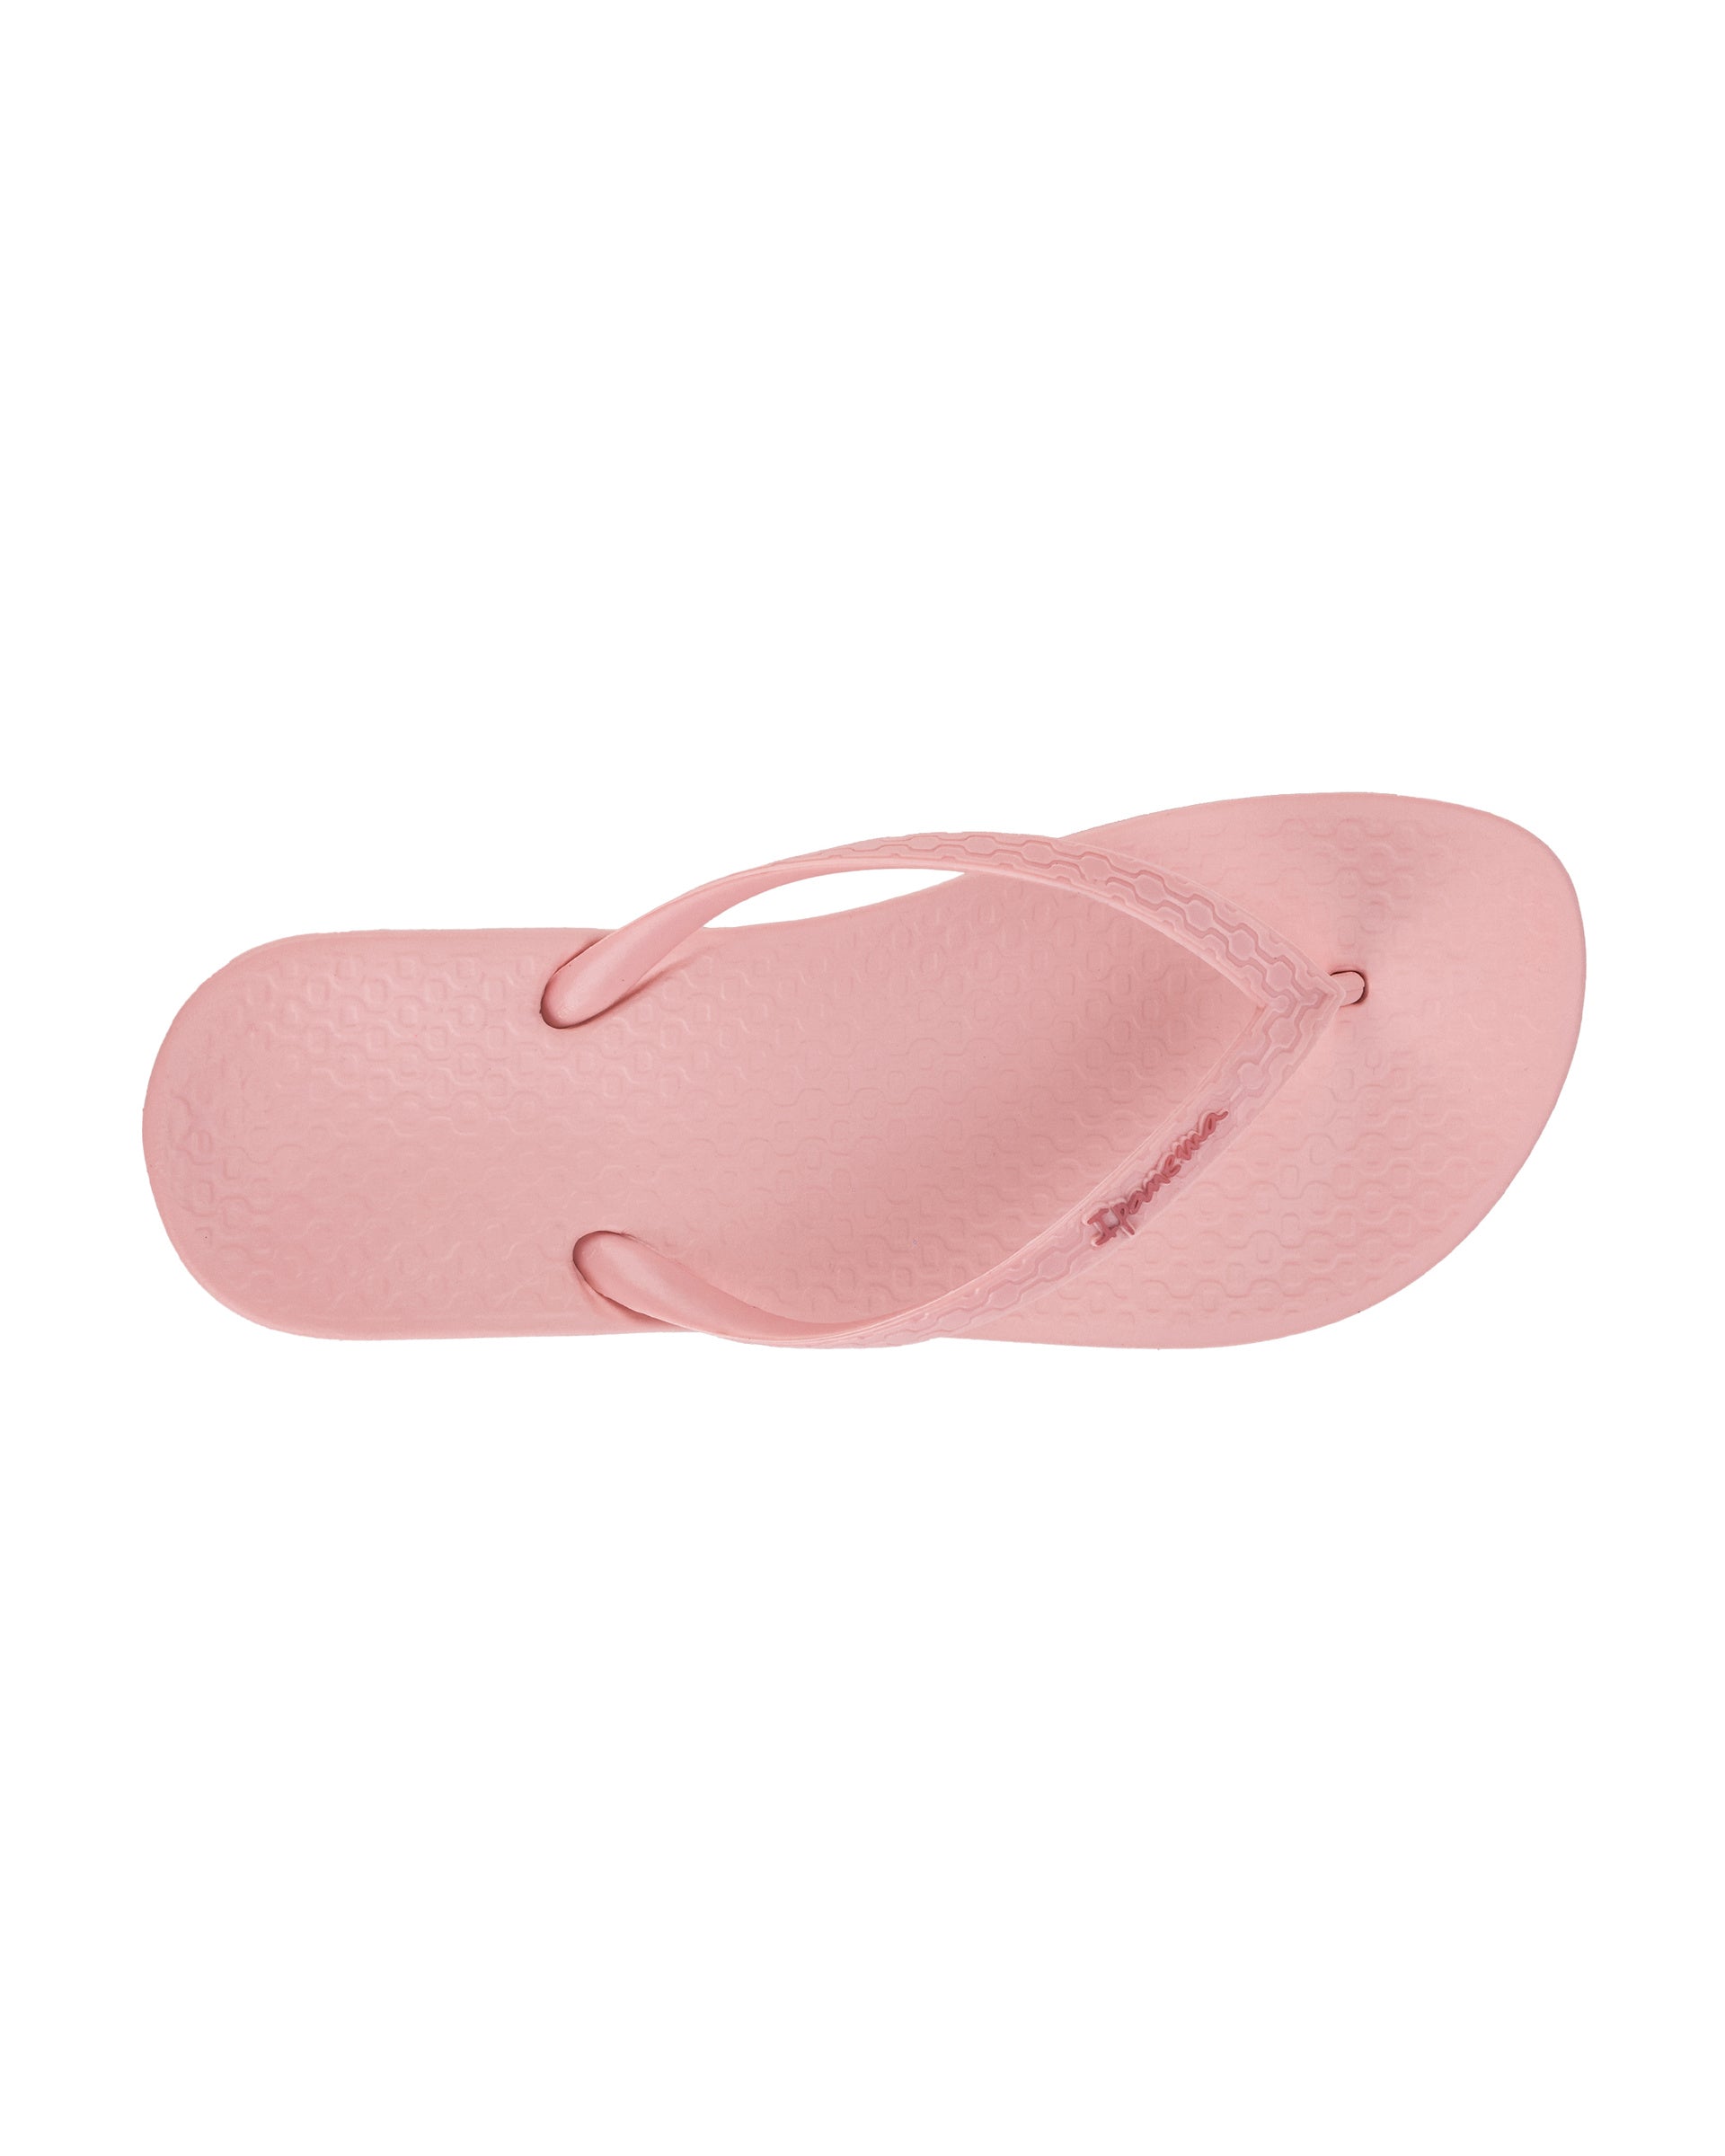 Top view of a pink Ipanema Ana Colors women's flip flop.